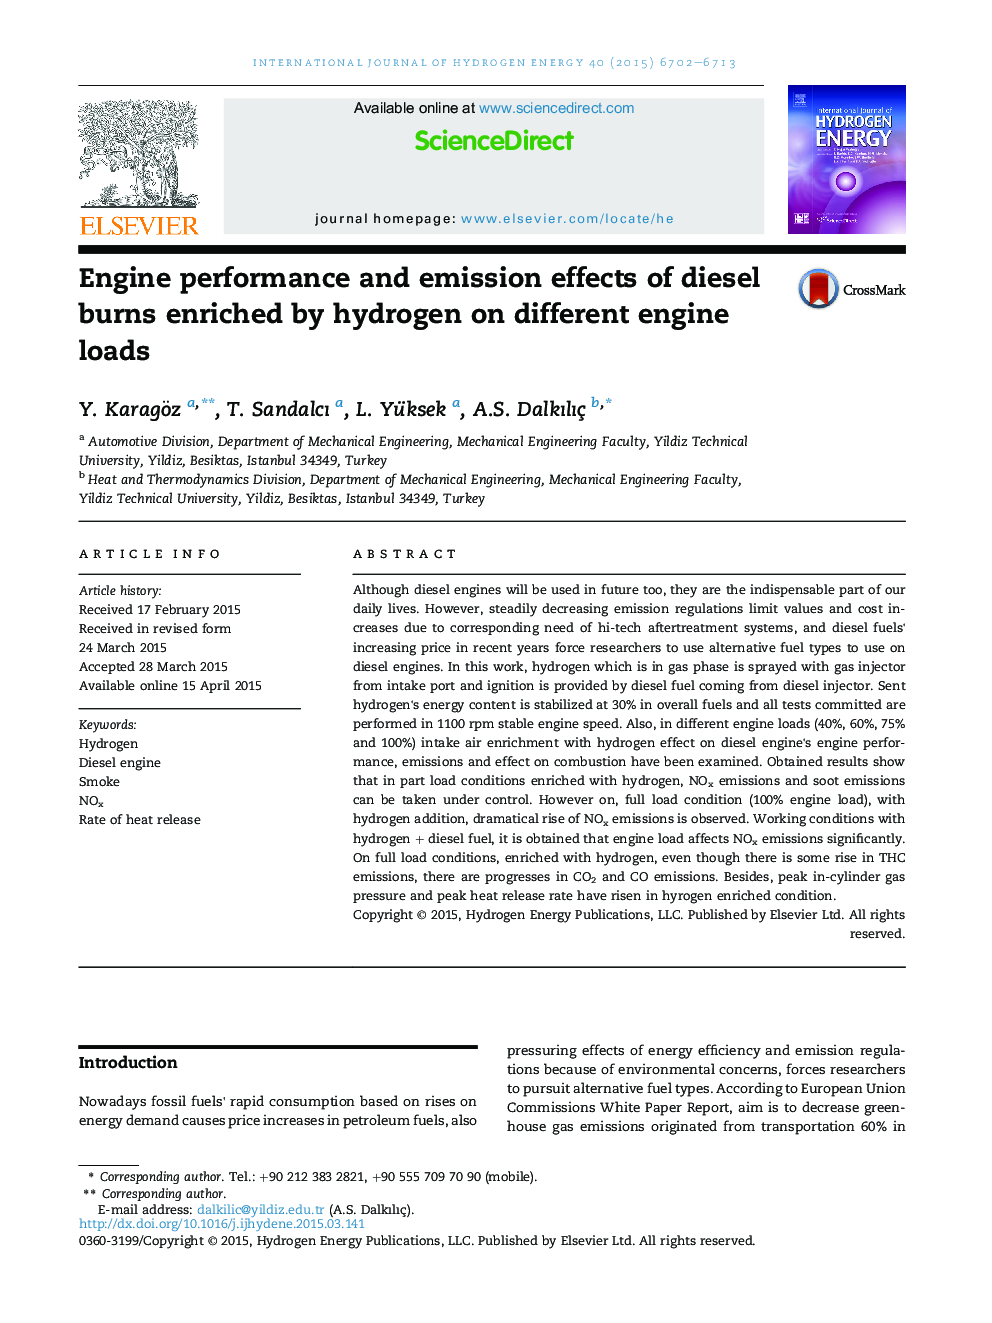 Engine performance and emission effects of diesel burns enriched by hydrogen on different engine loads